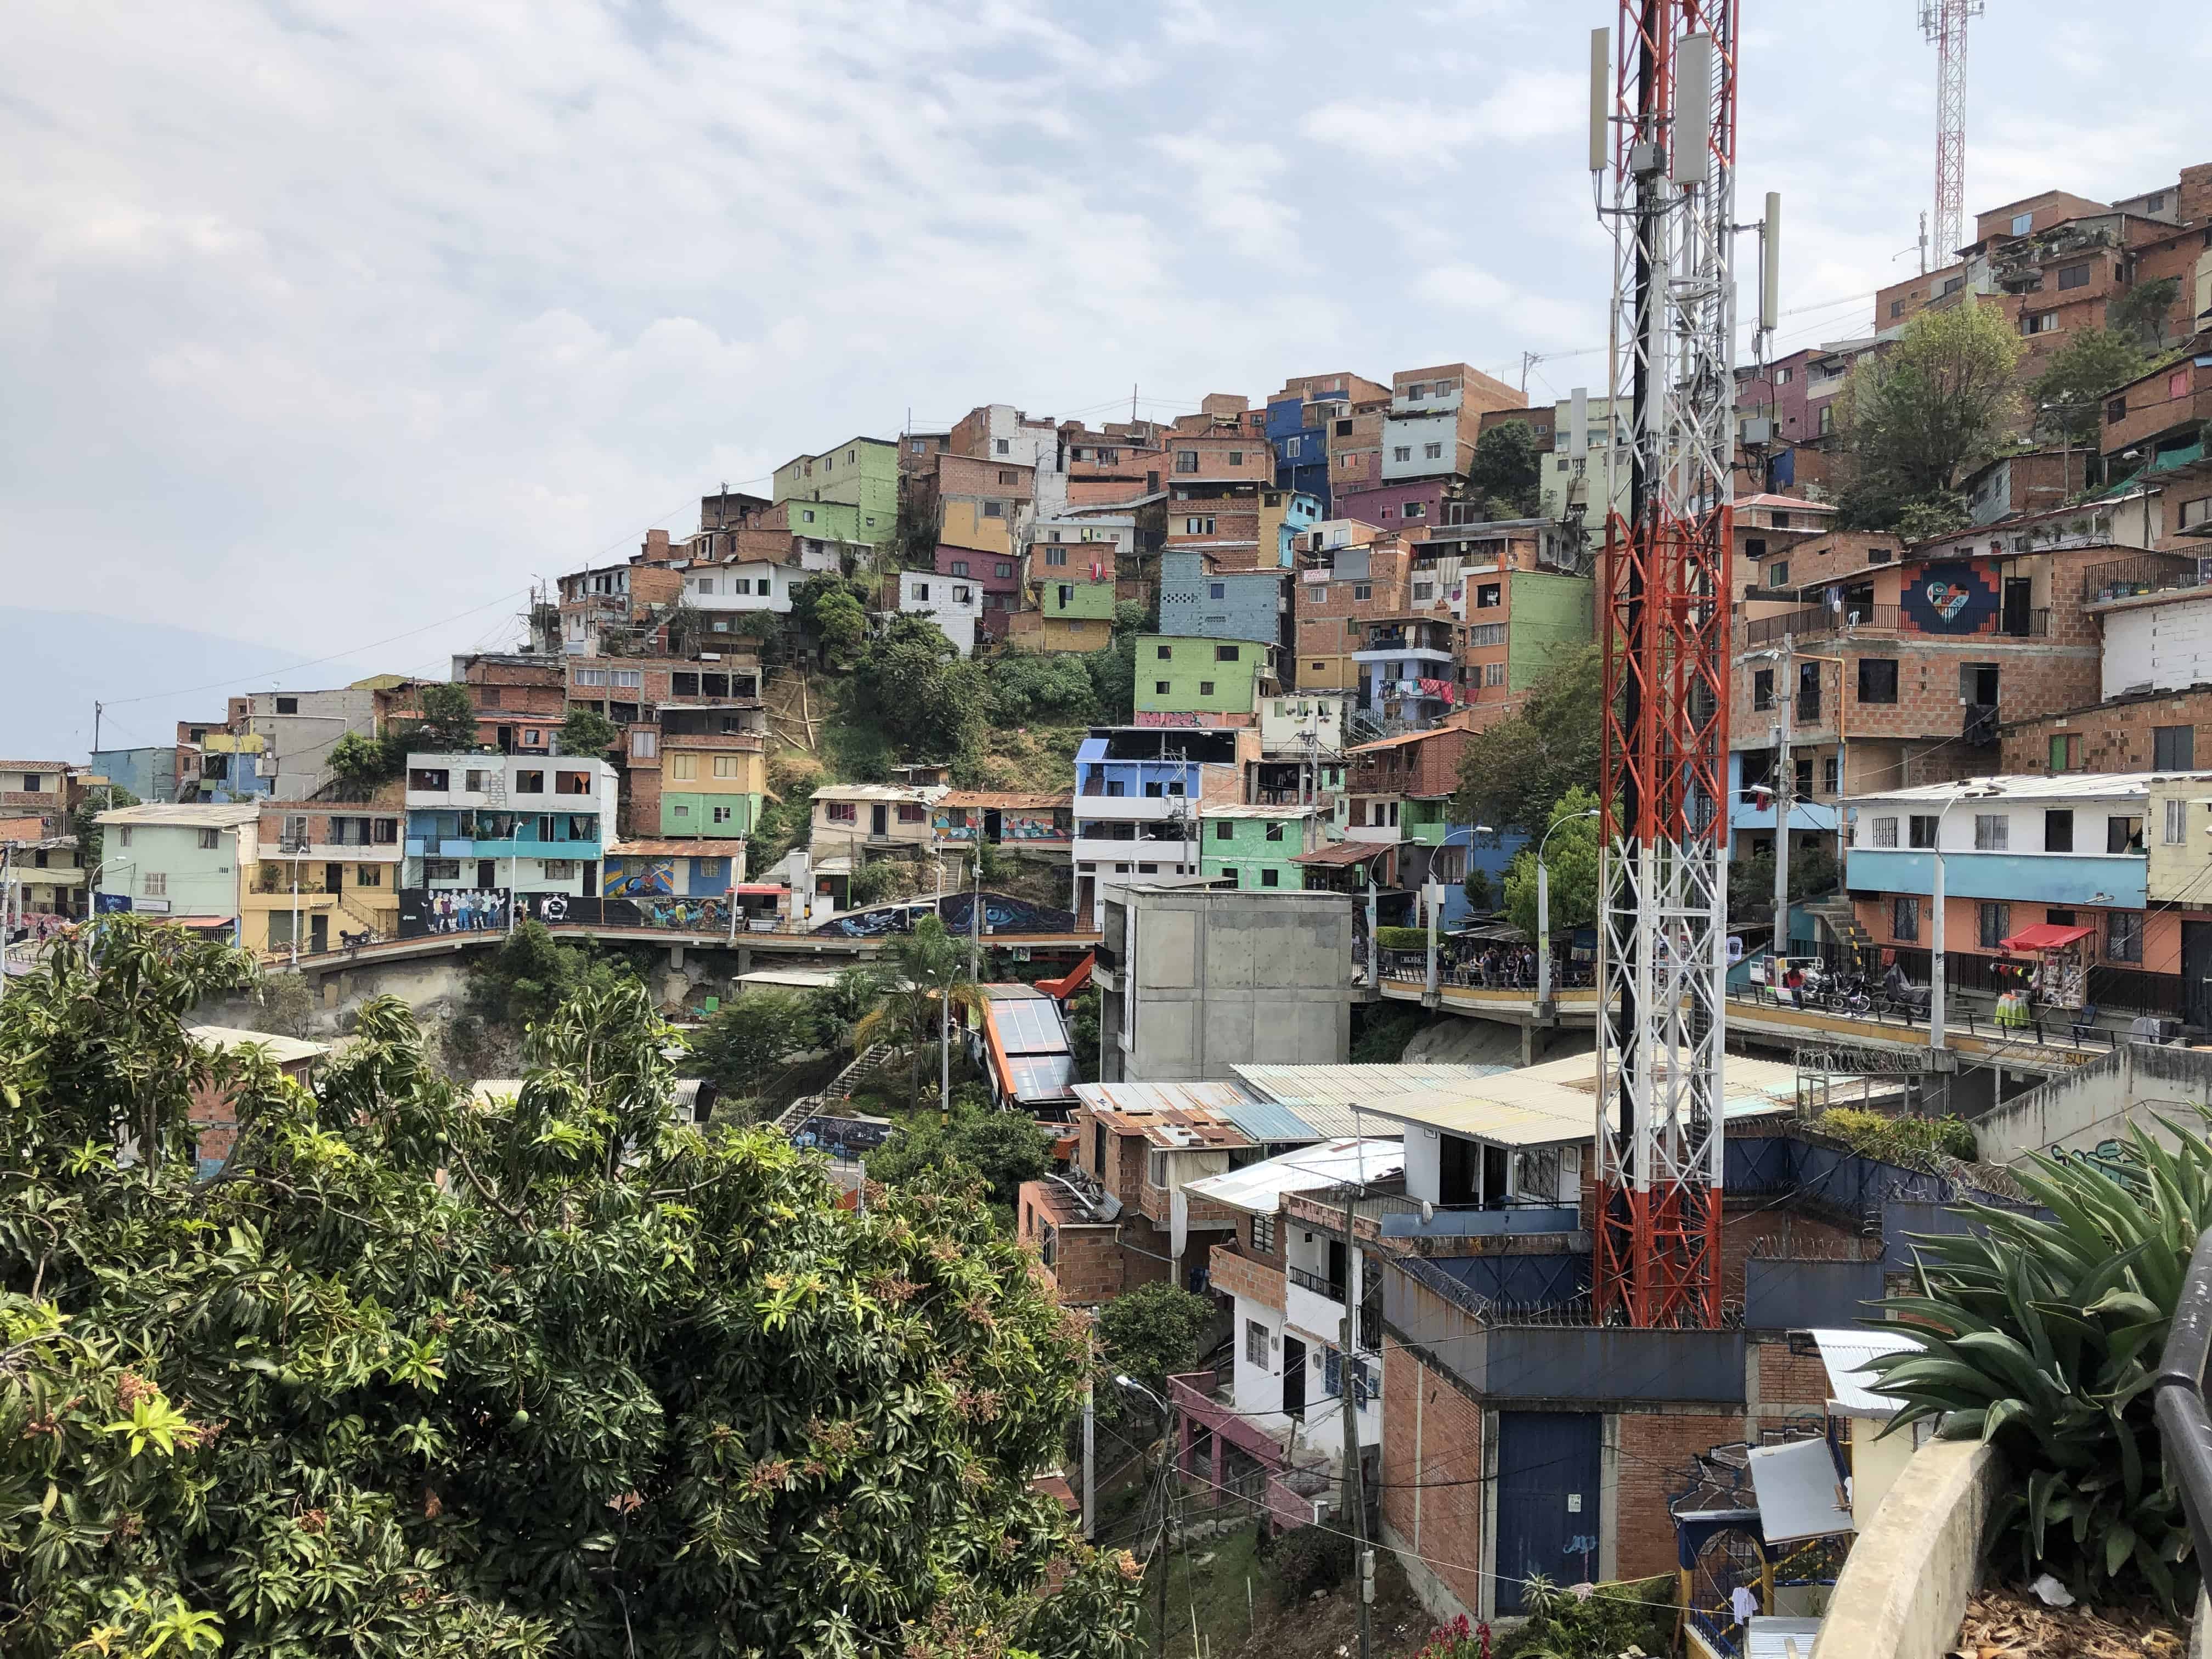 Comuna 13 from the top, Medellín, Antioquia, Colombia